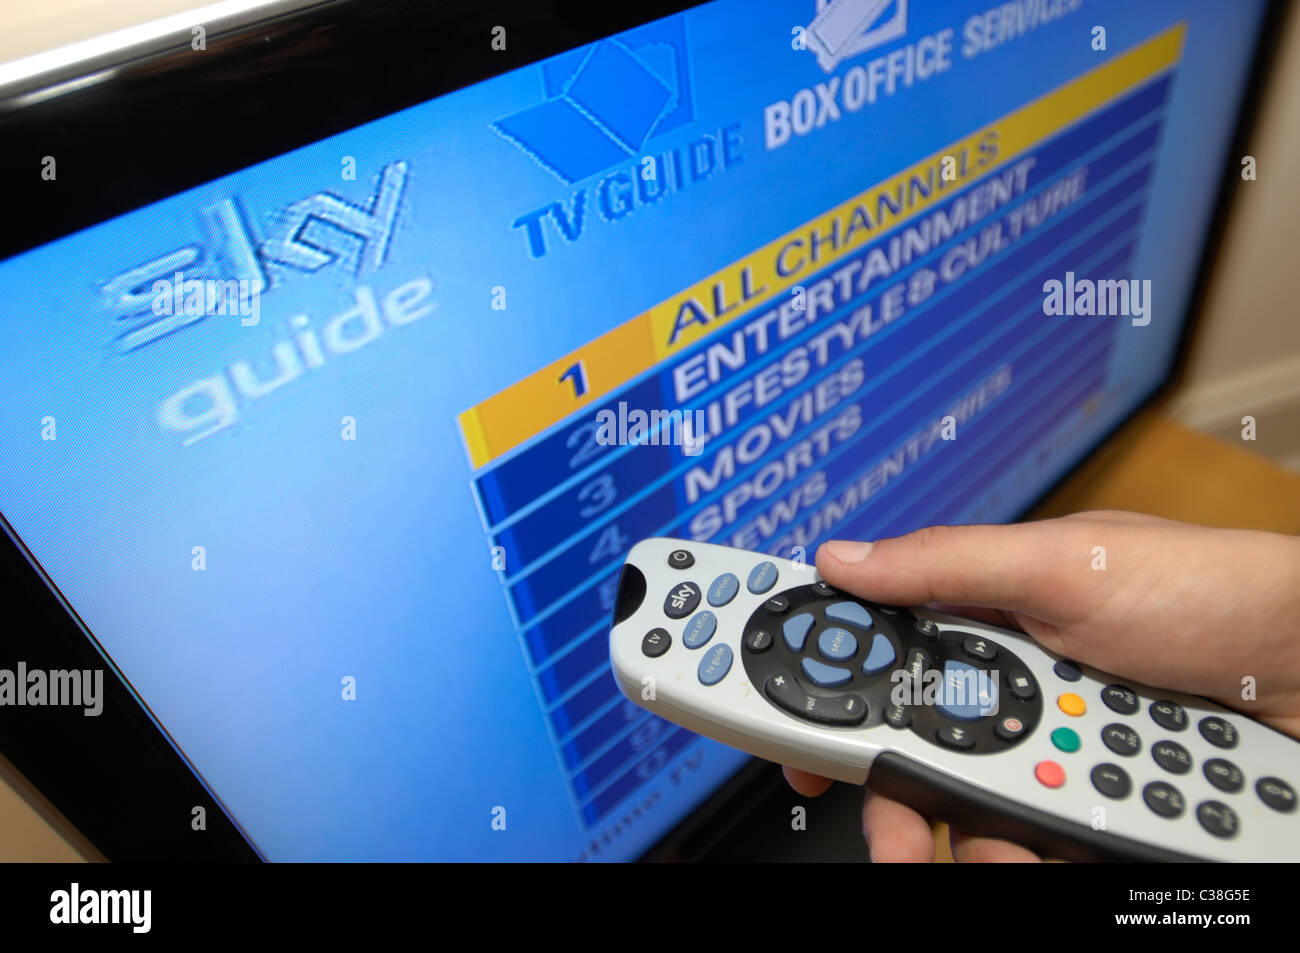 Illustrative image of Sky's television services. Stock Photo